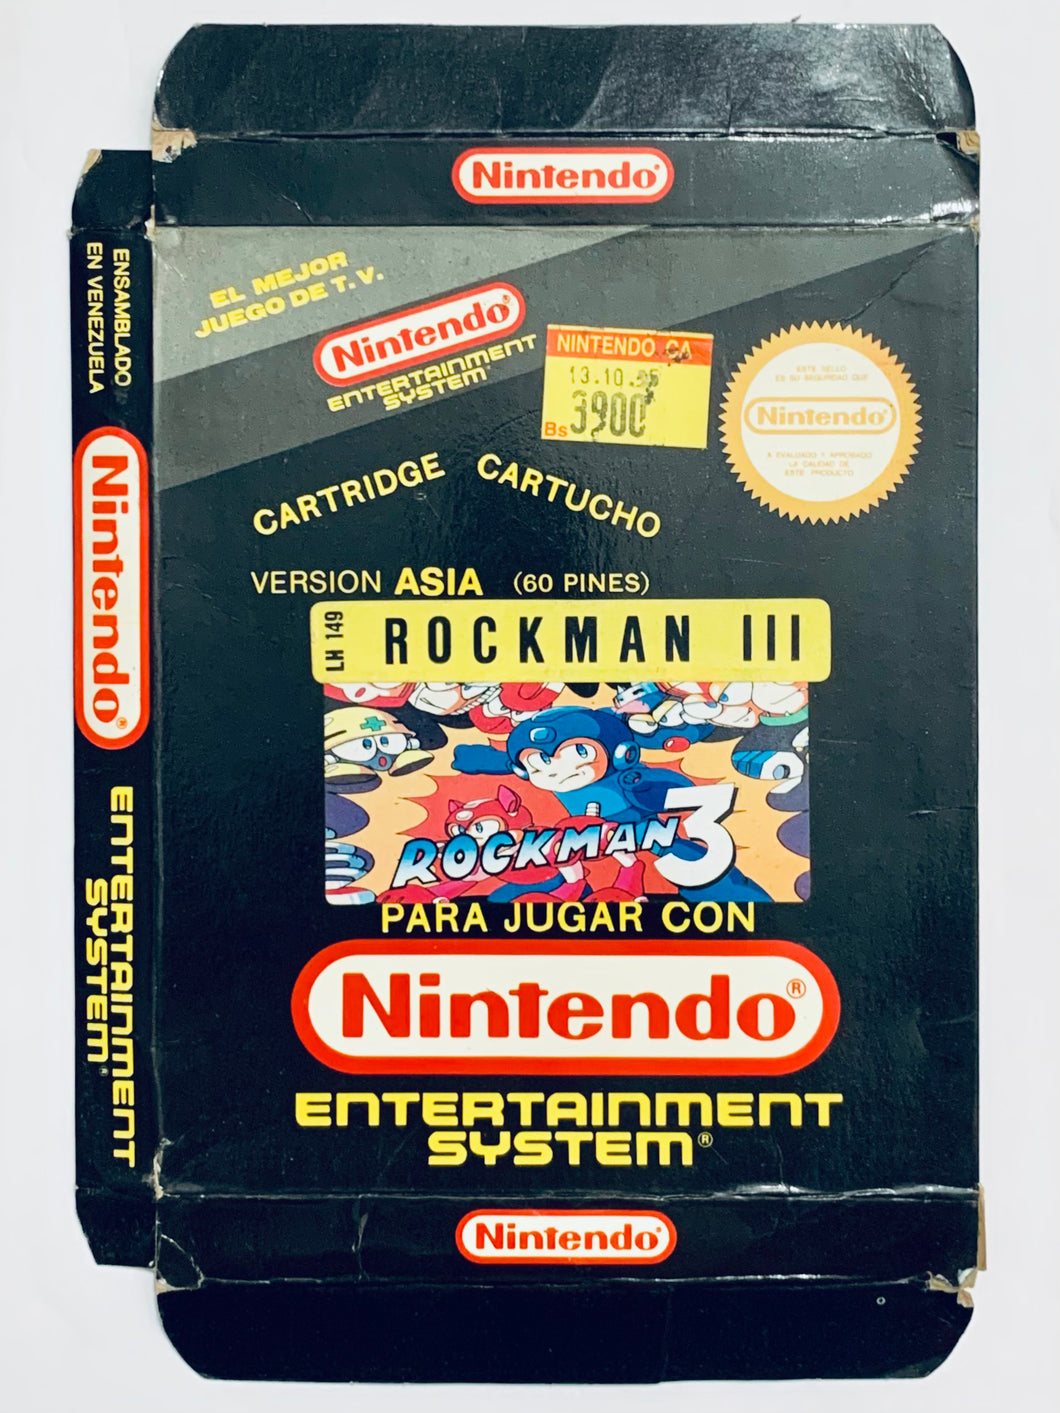 RockMan III - Famiclone - FC / NES - Vintage - Box Only (LH-149)